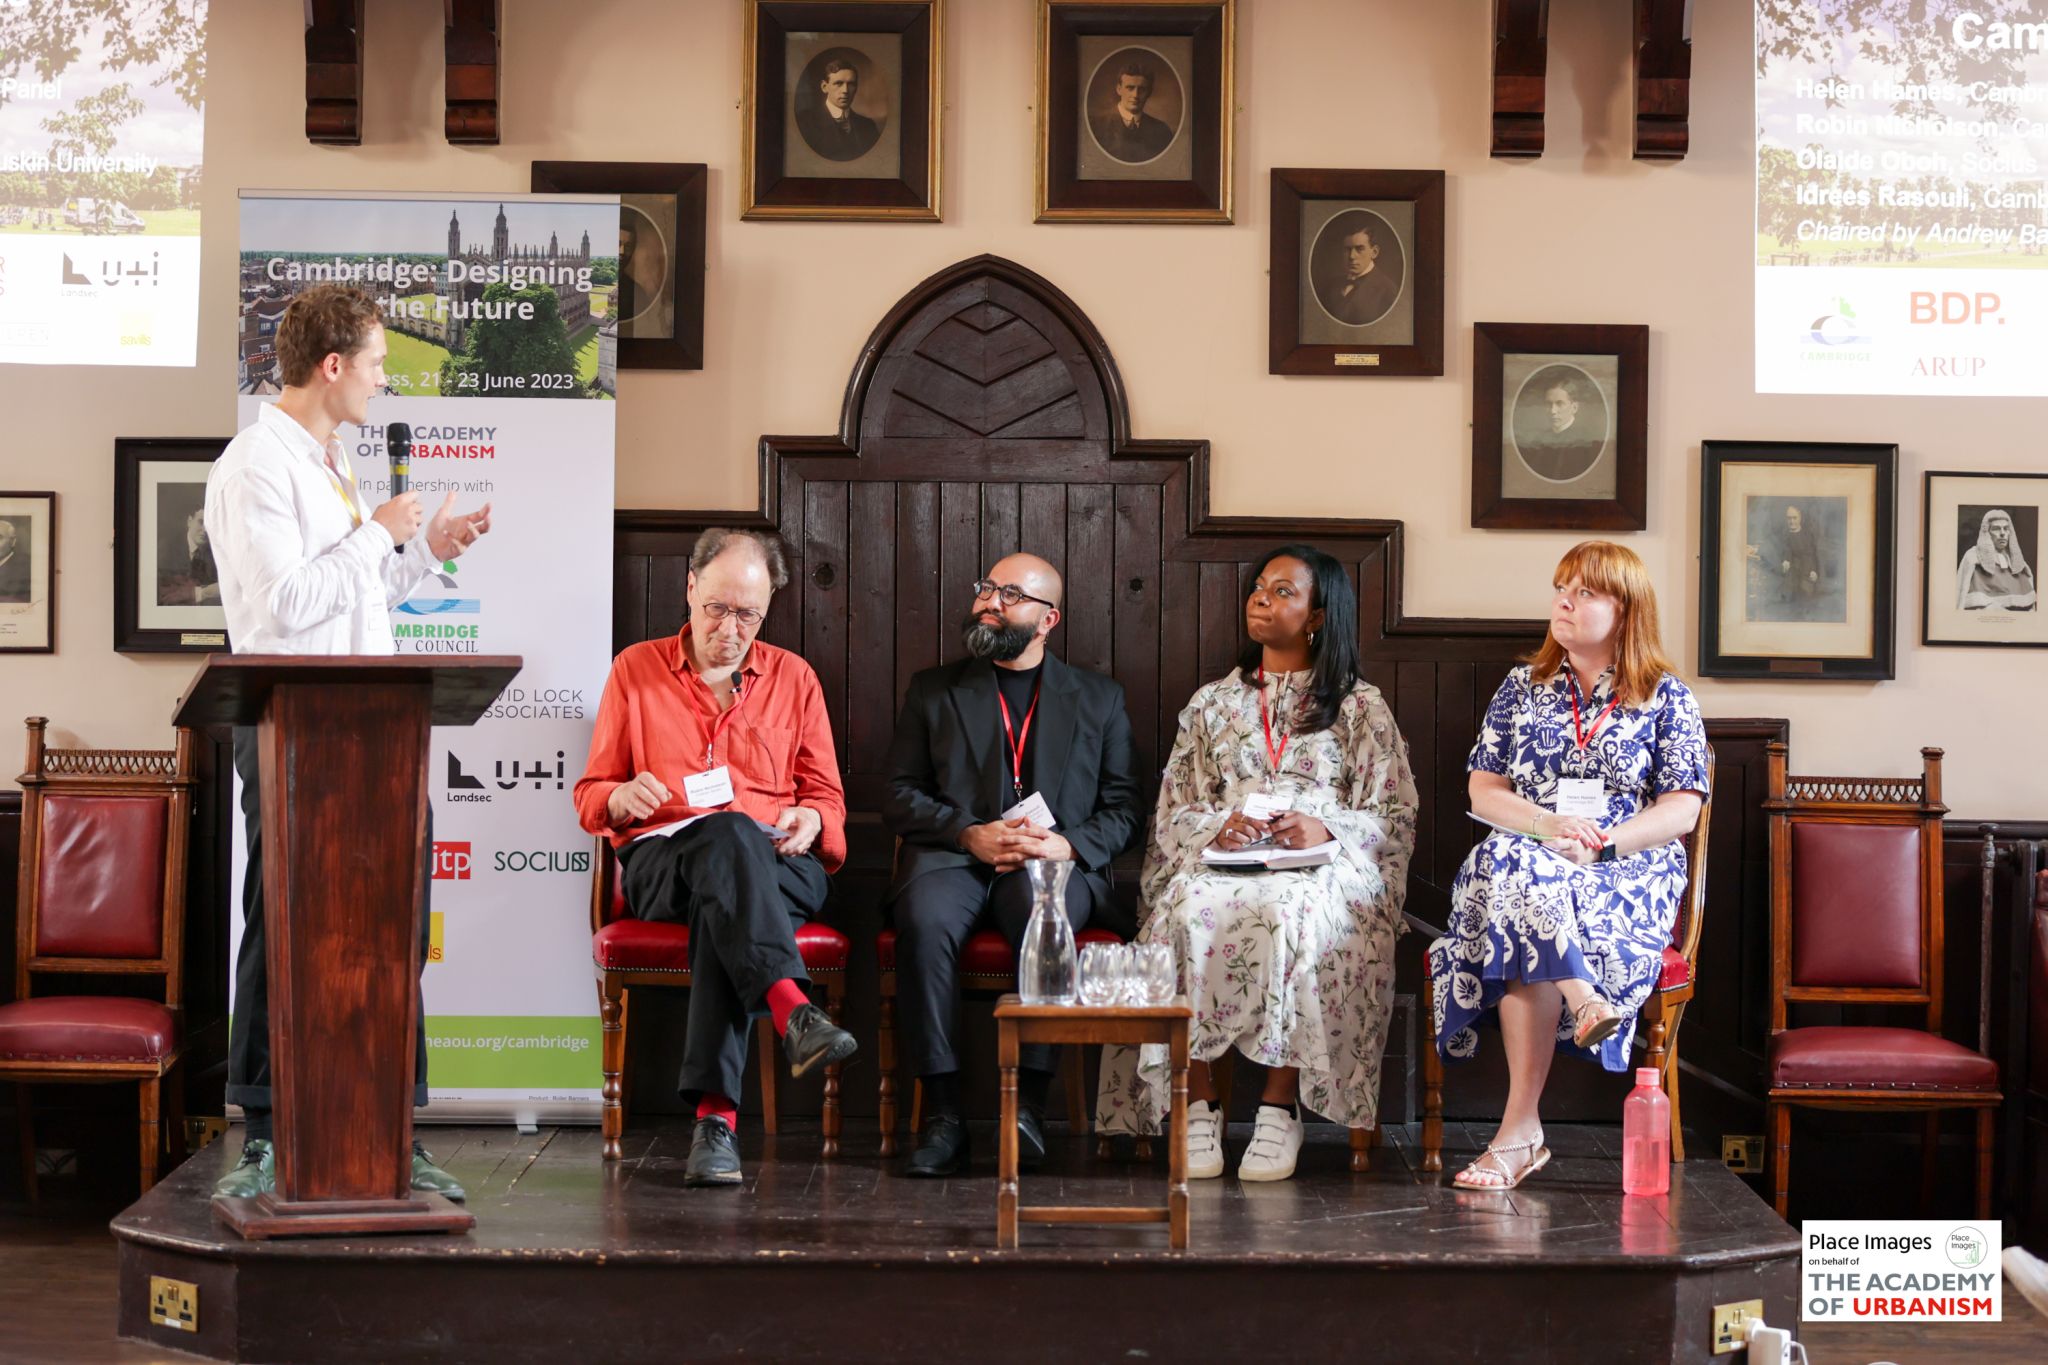 Idrees Rasouli sitting on panel at event in church